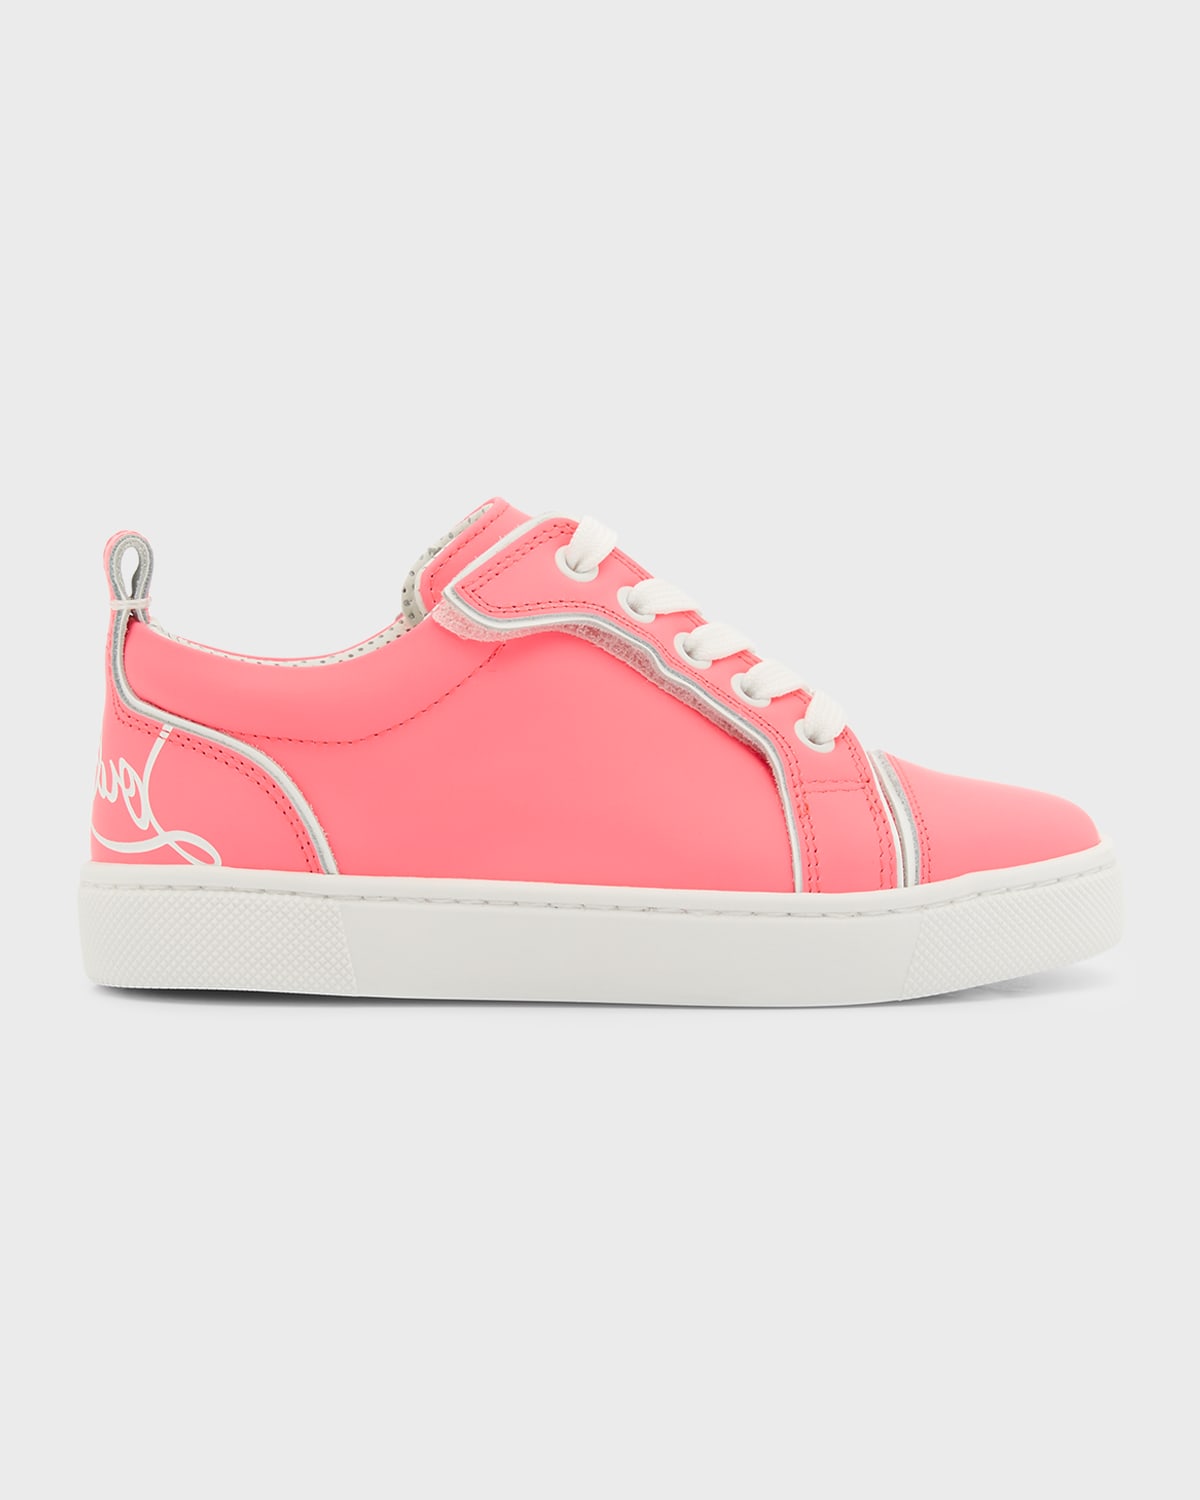 Christian Louboutin Kids' Funnyto Low-Top Sneakers